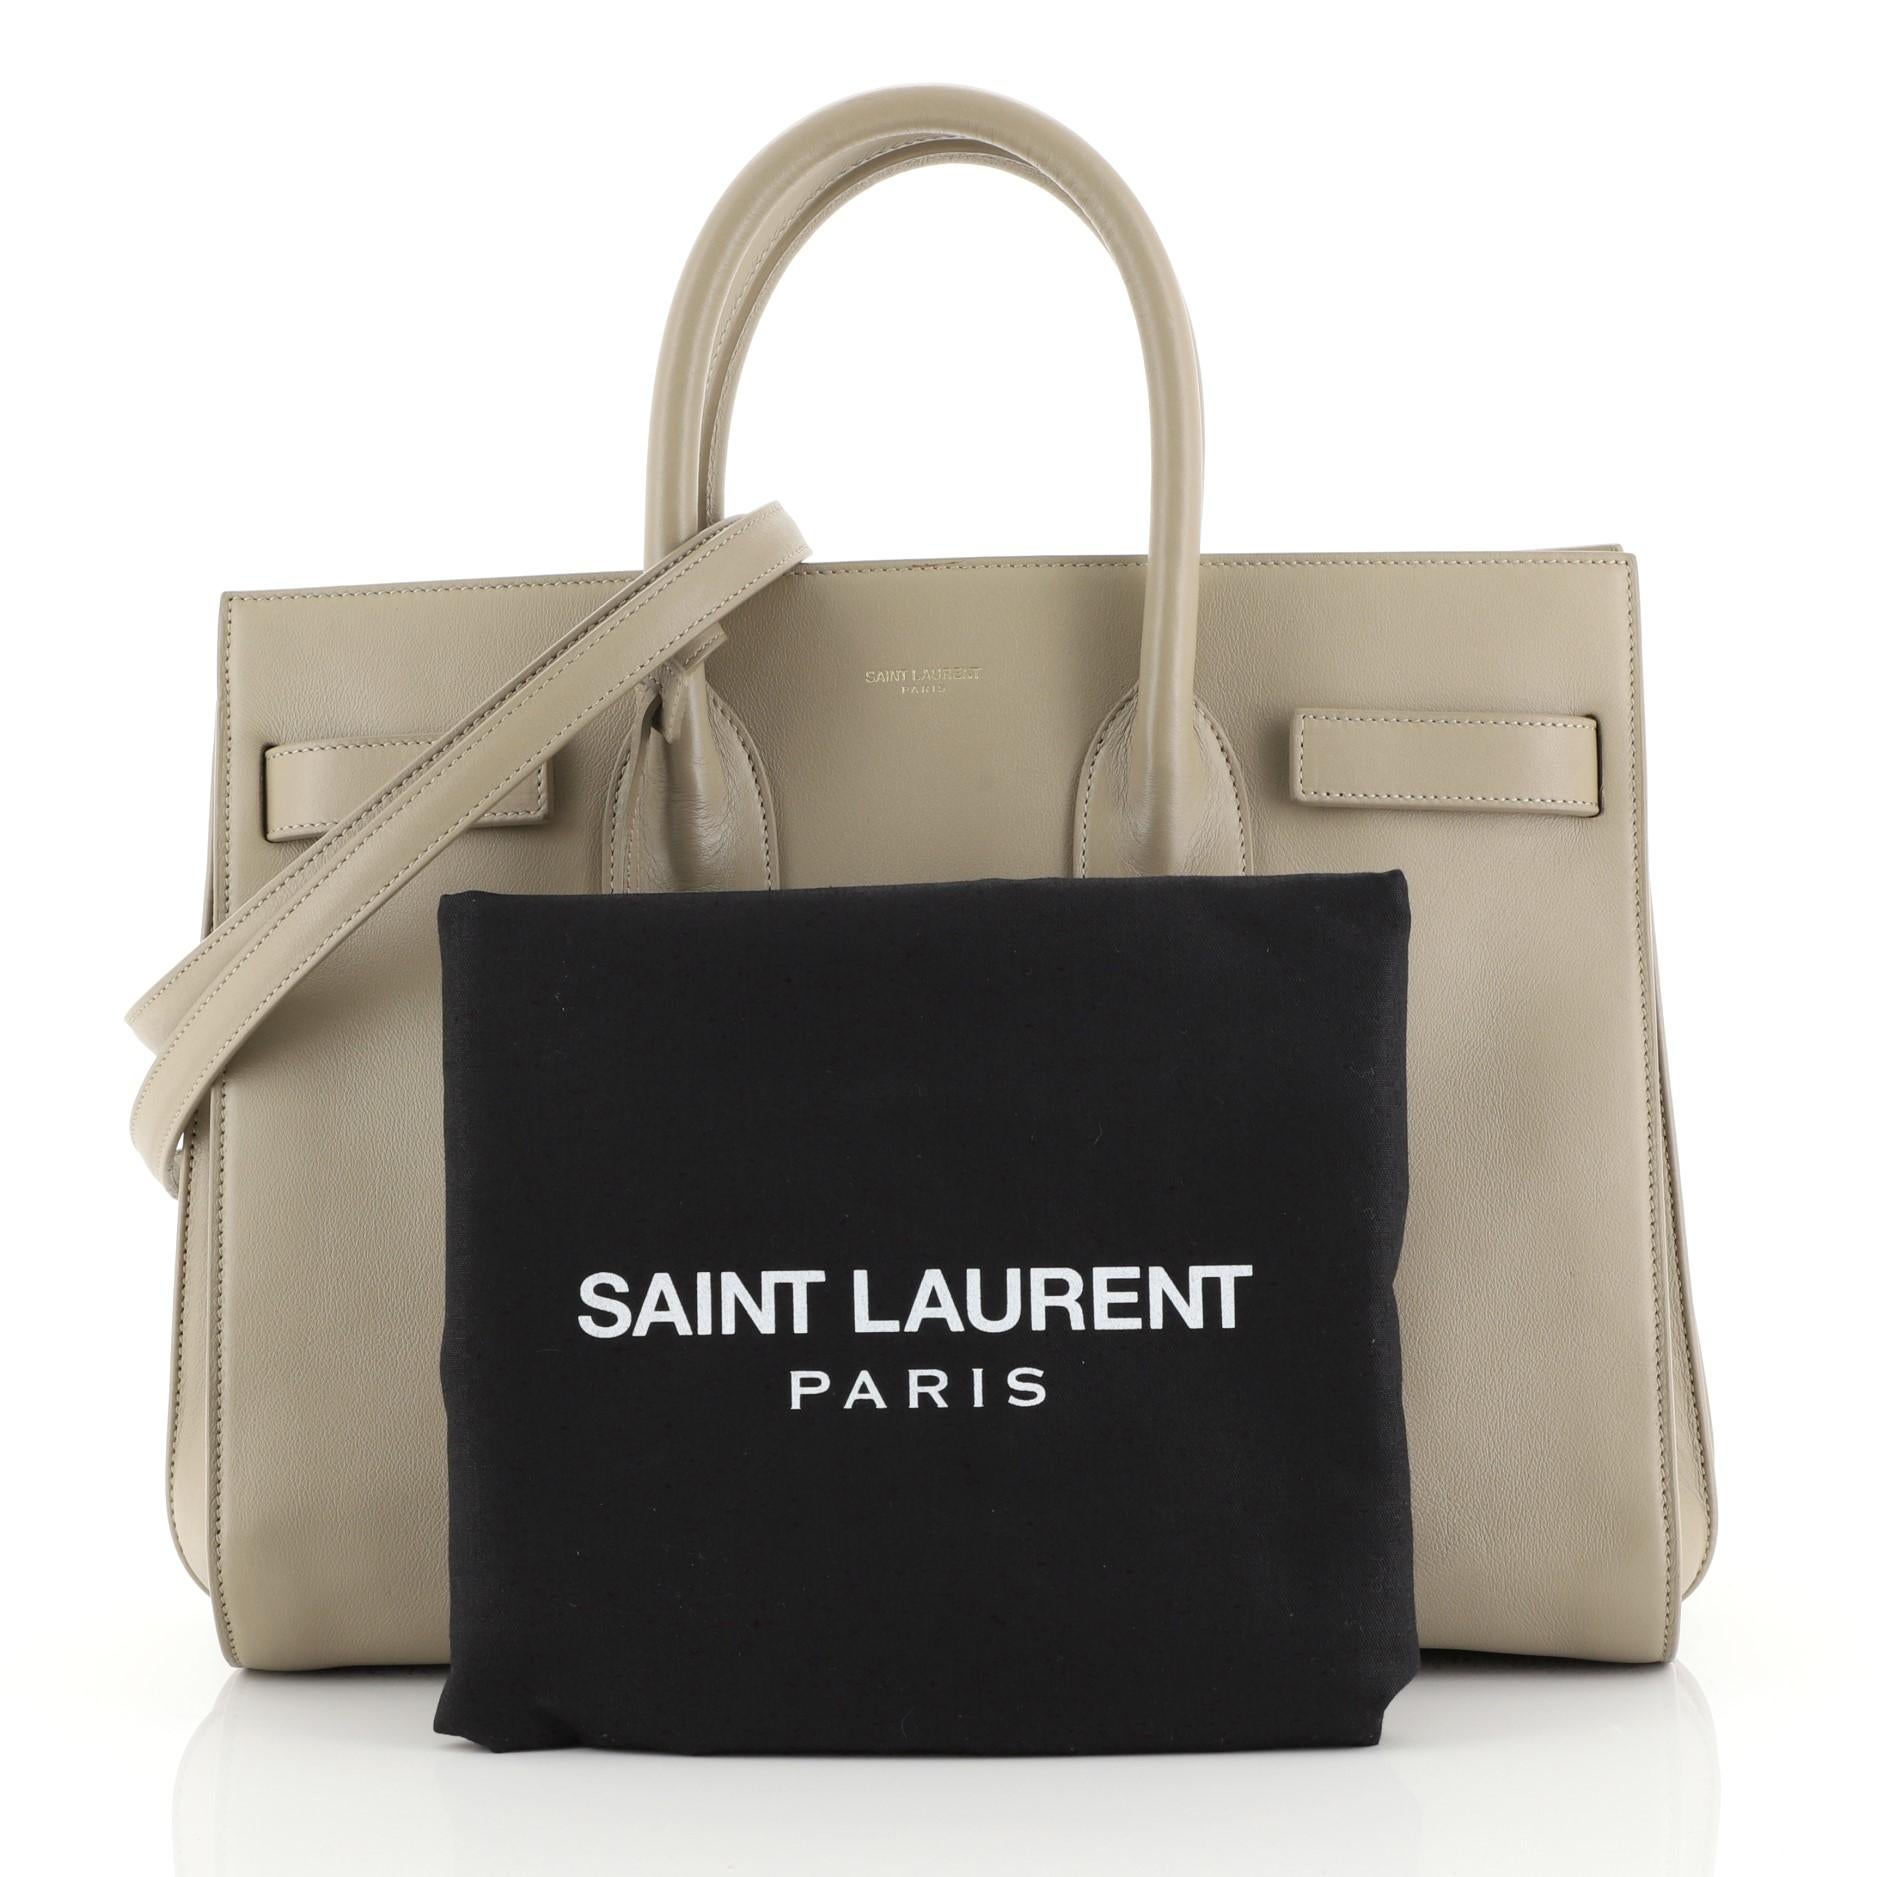 This Saint Laurent Sac de Jour Bag Leather Small, crafted from neutral leather, features dual rolled leather handles, protective base studs, and gold-tone hardware. It opens to a neutral suede and black fabric interior with middle zip compartment.